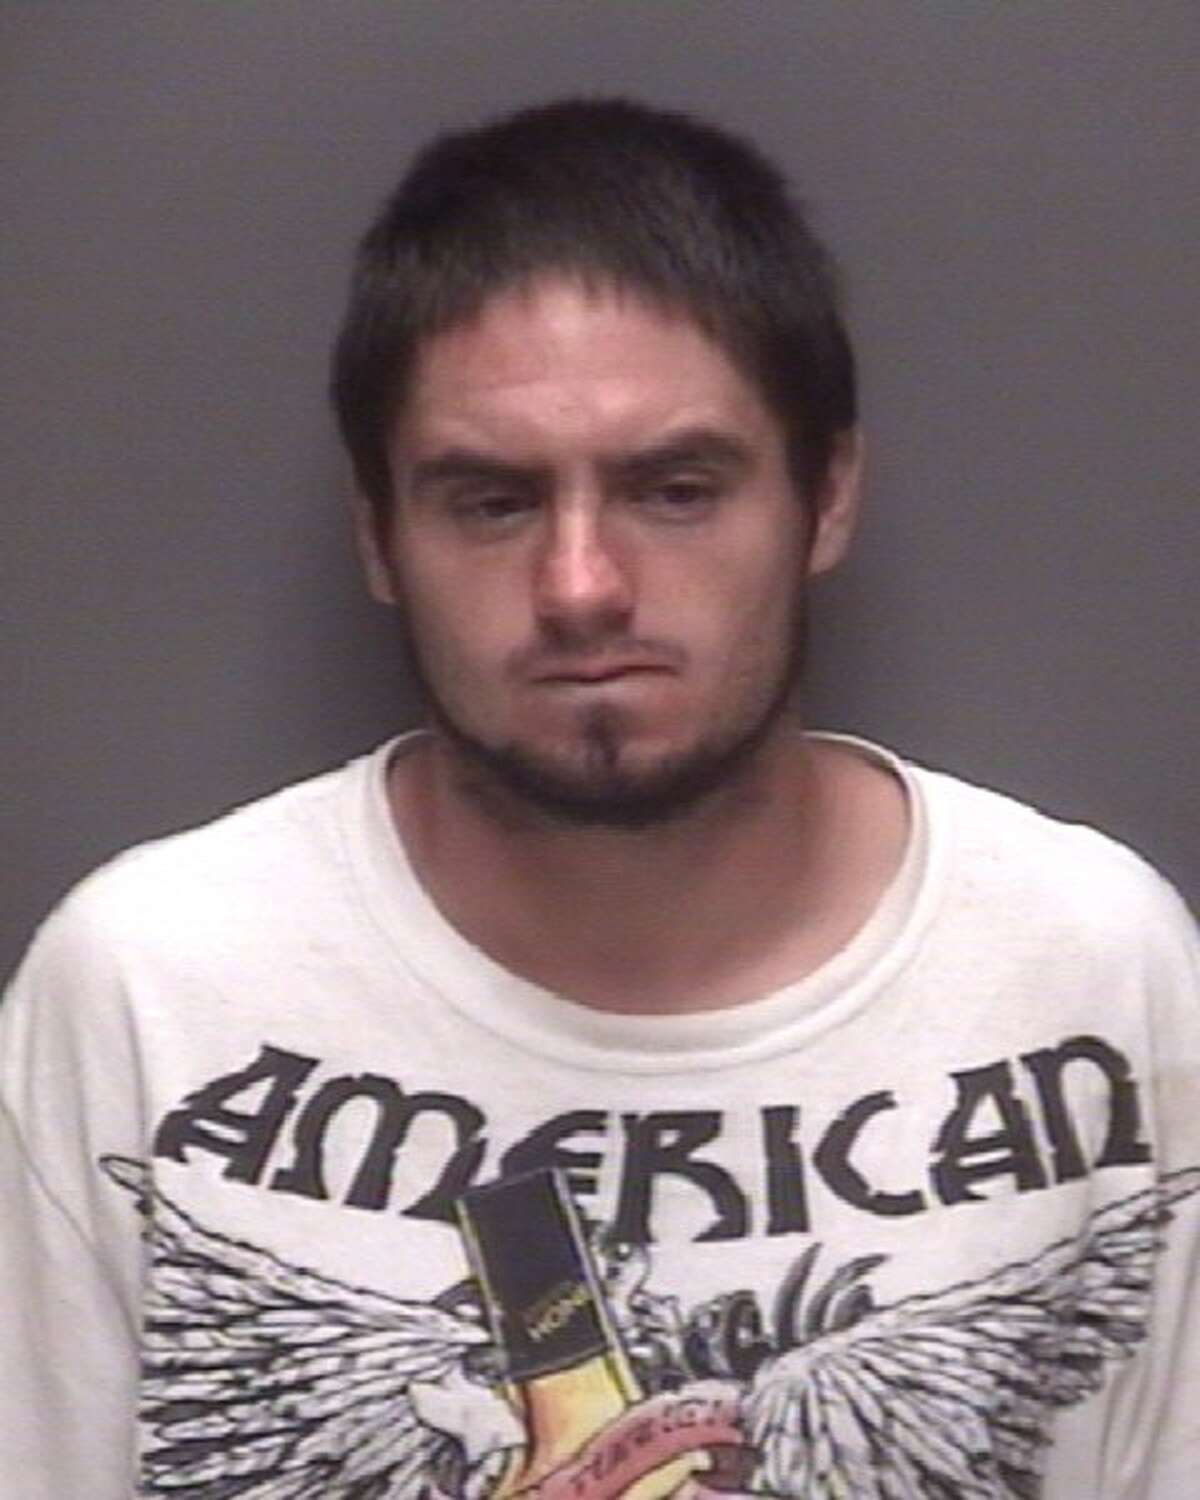 Ricky Meyers, 25, was in the Galveston County Jail on Friday on drug charges. His bond was set at $750.